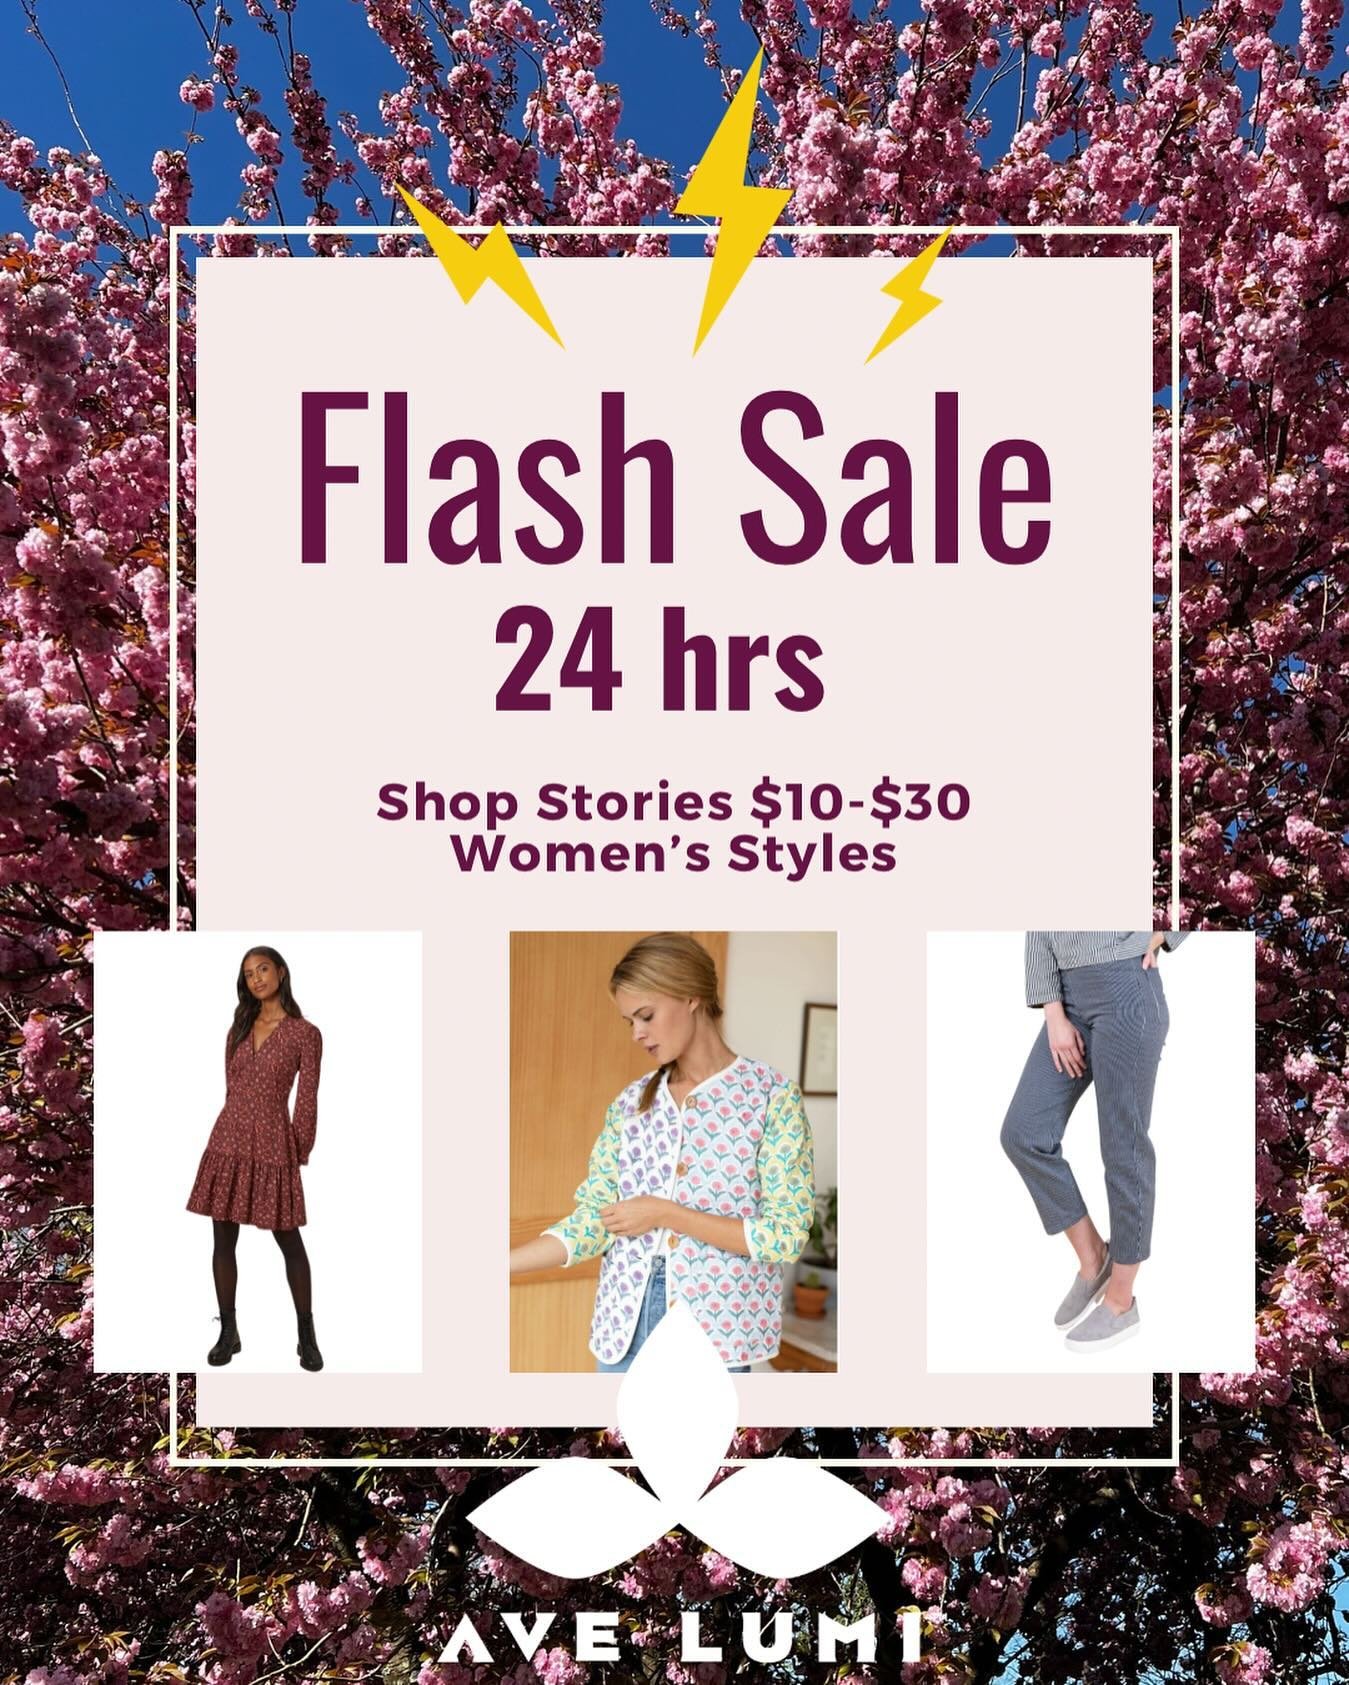 ⚡️ FLASH SALE ⚡️Round 2! $10-$30 Women&rsquo;s styles have been posted up in stories for you to claim! 

Reply to the pieces you want: 1st come 1st served! 

If these sales keep rockin, we&rsquo;ll make it a regular affair!💃🏽 Thank you for supporti